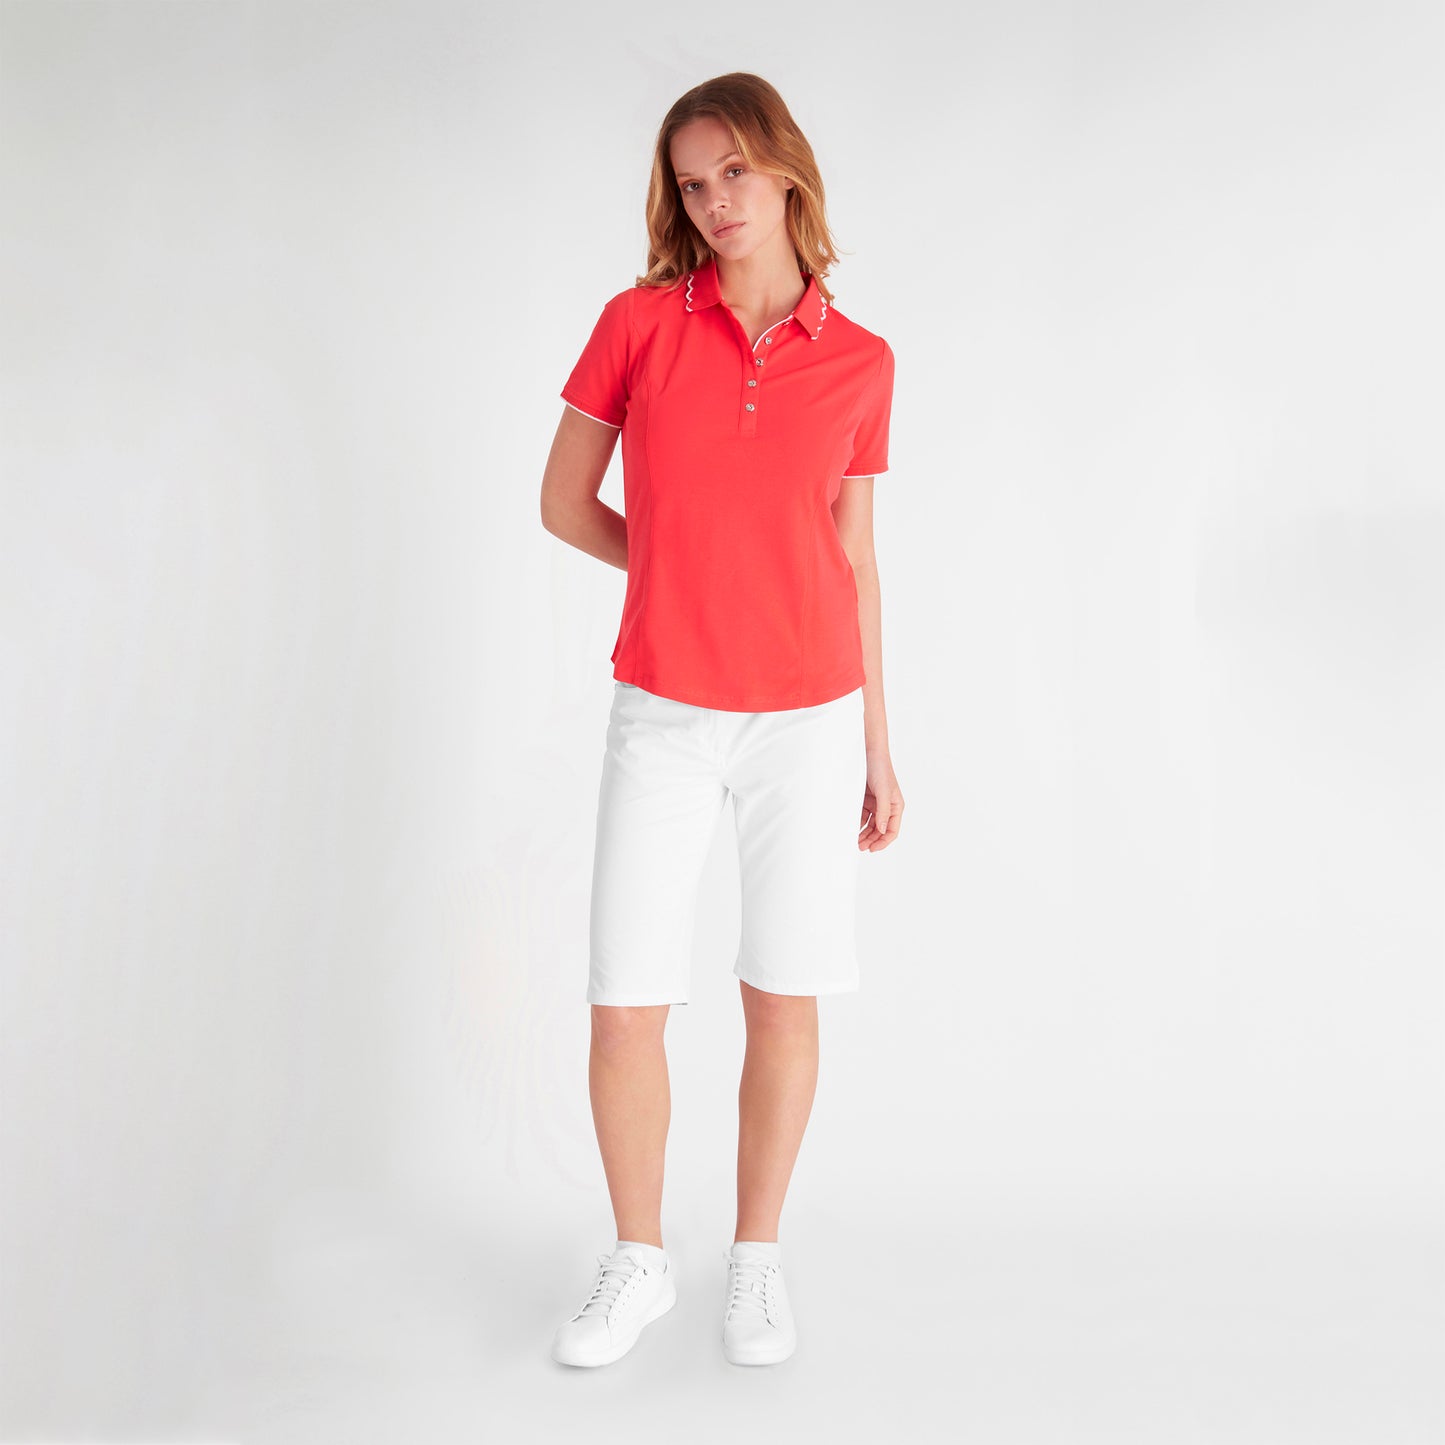 Green Lamb Ladies Short Sleeve Polo with Scalloped Collar in Poppy